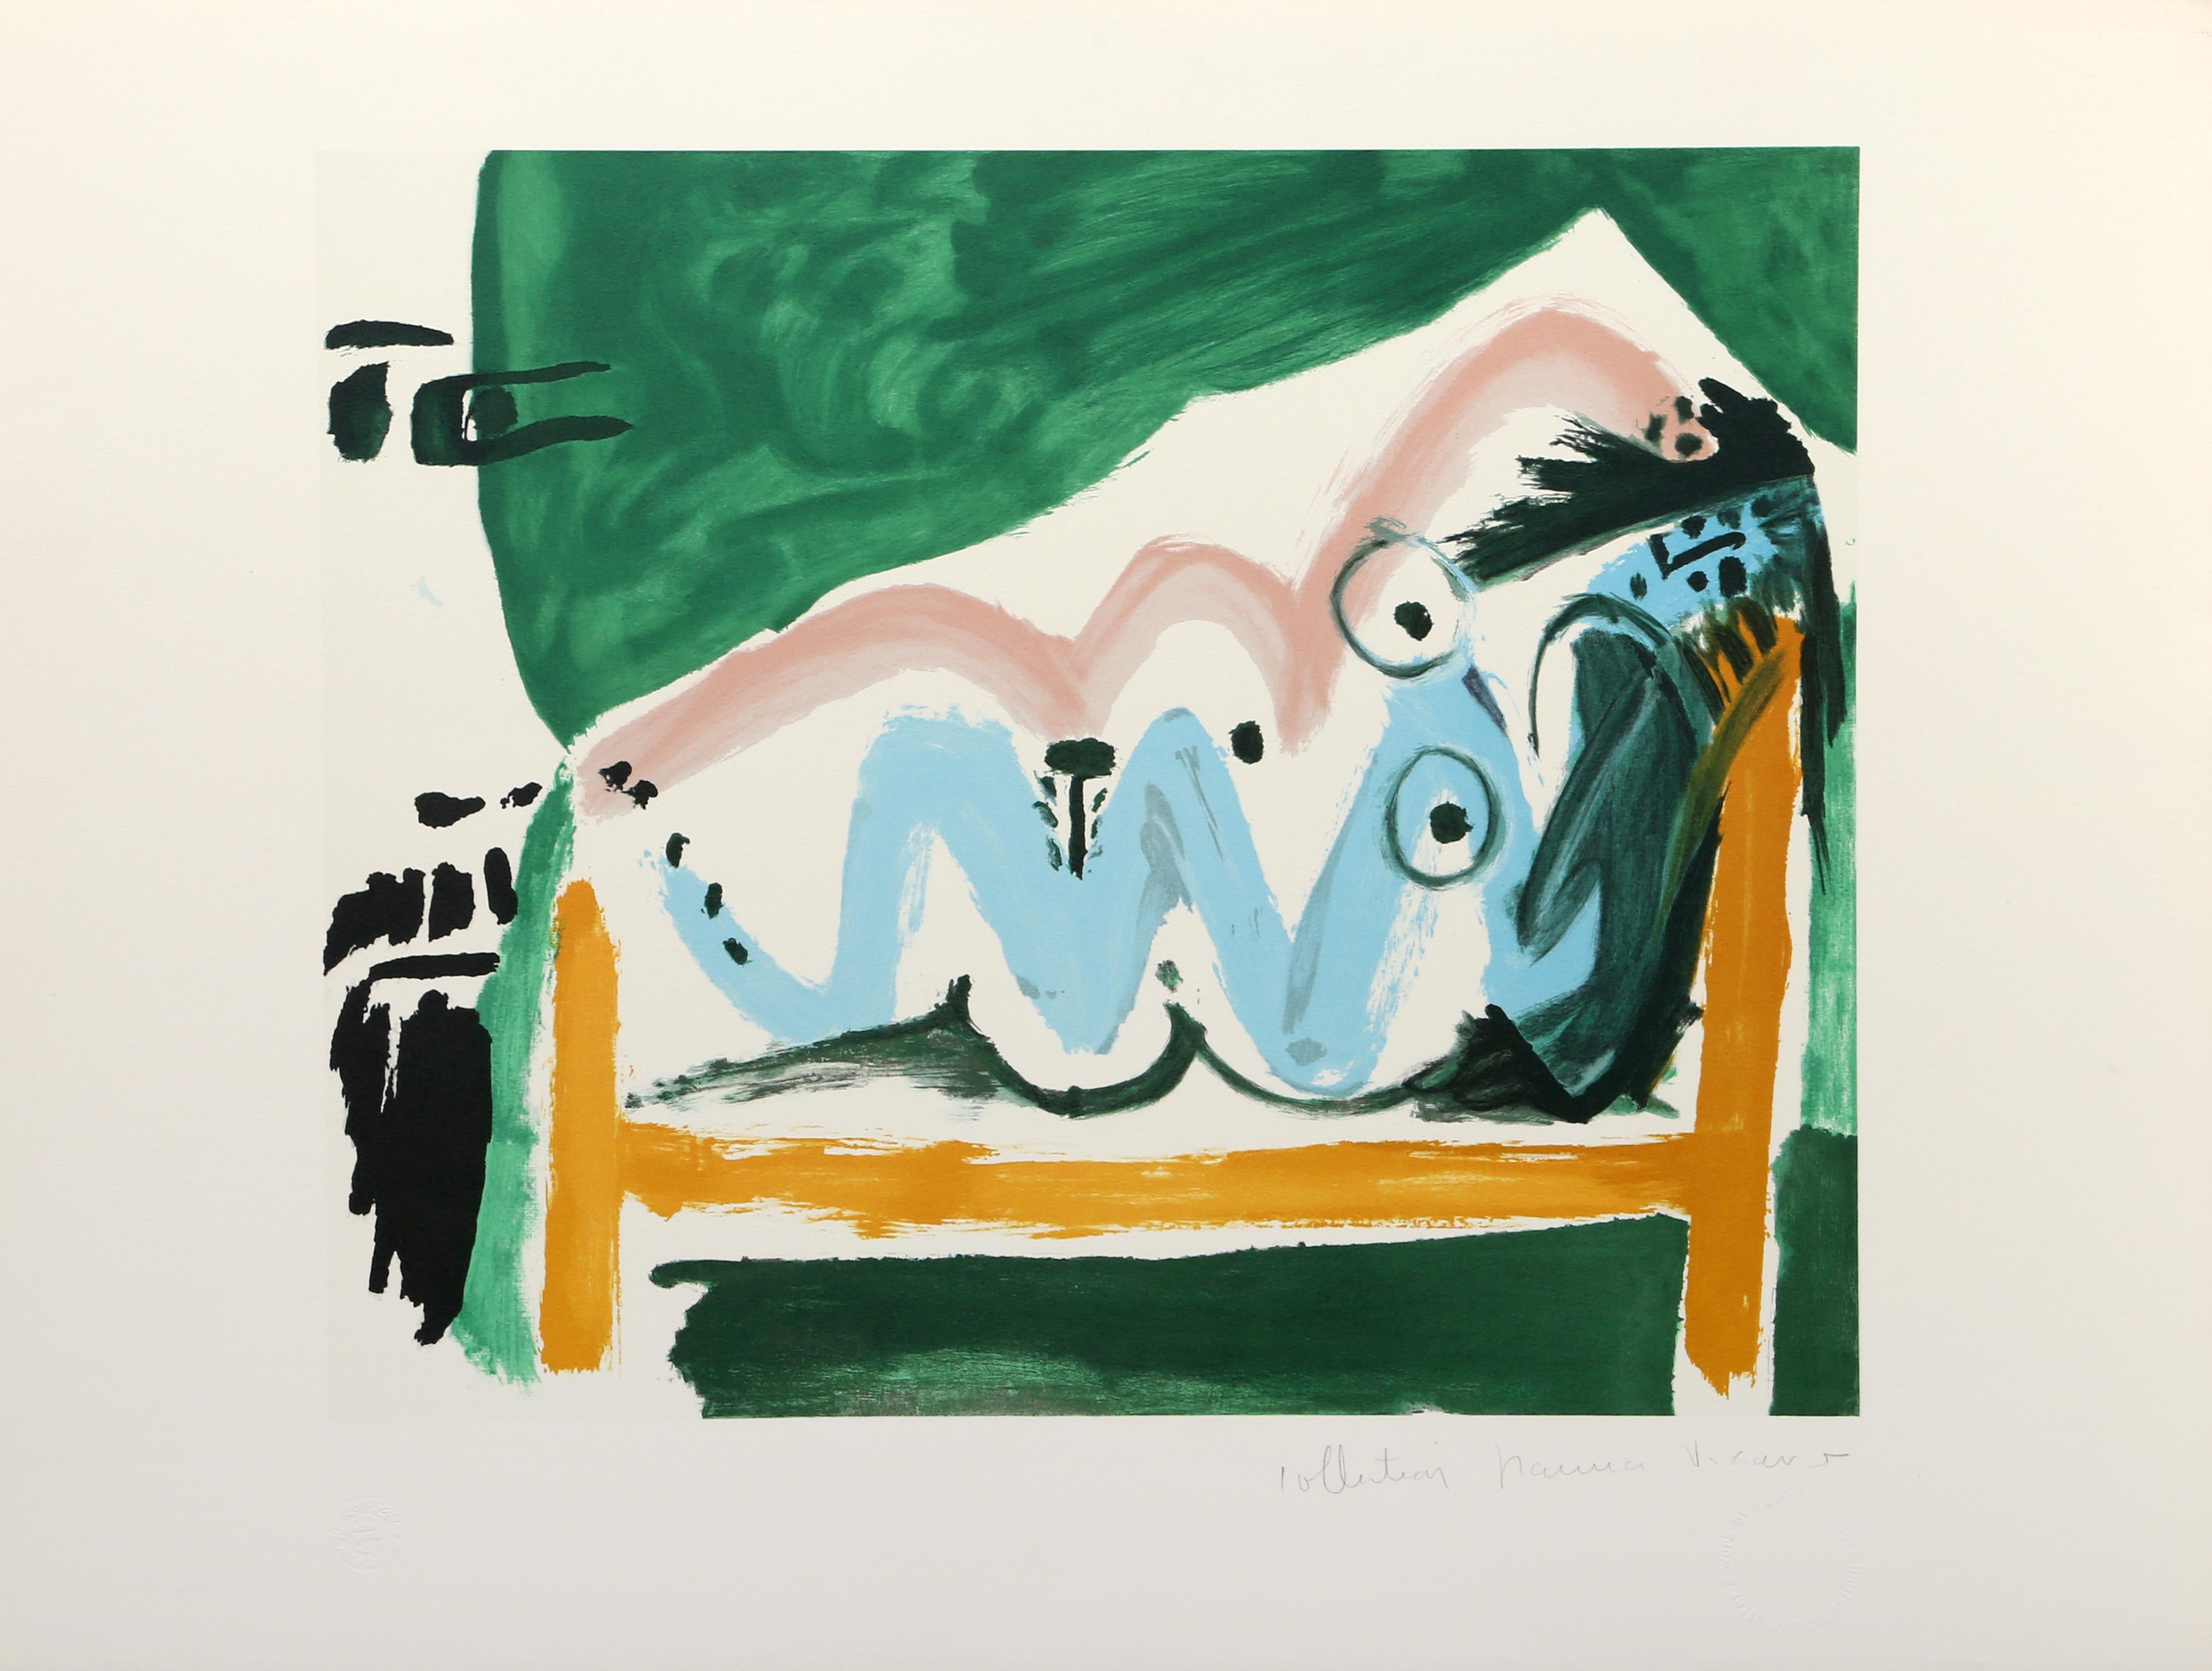 Laying across a piece of furniture, the nude female model in this Pablo Picasso print faces the viewer while she reclines and rests her arm across her head. Rendered in bright hues of emerald green and baby blue, the scene appears energized and